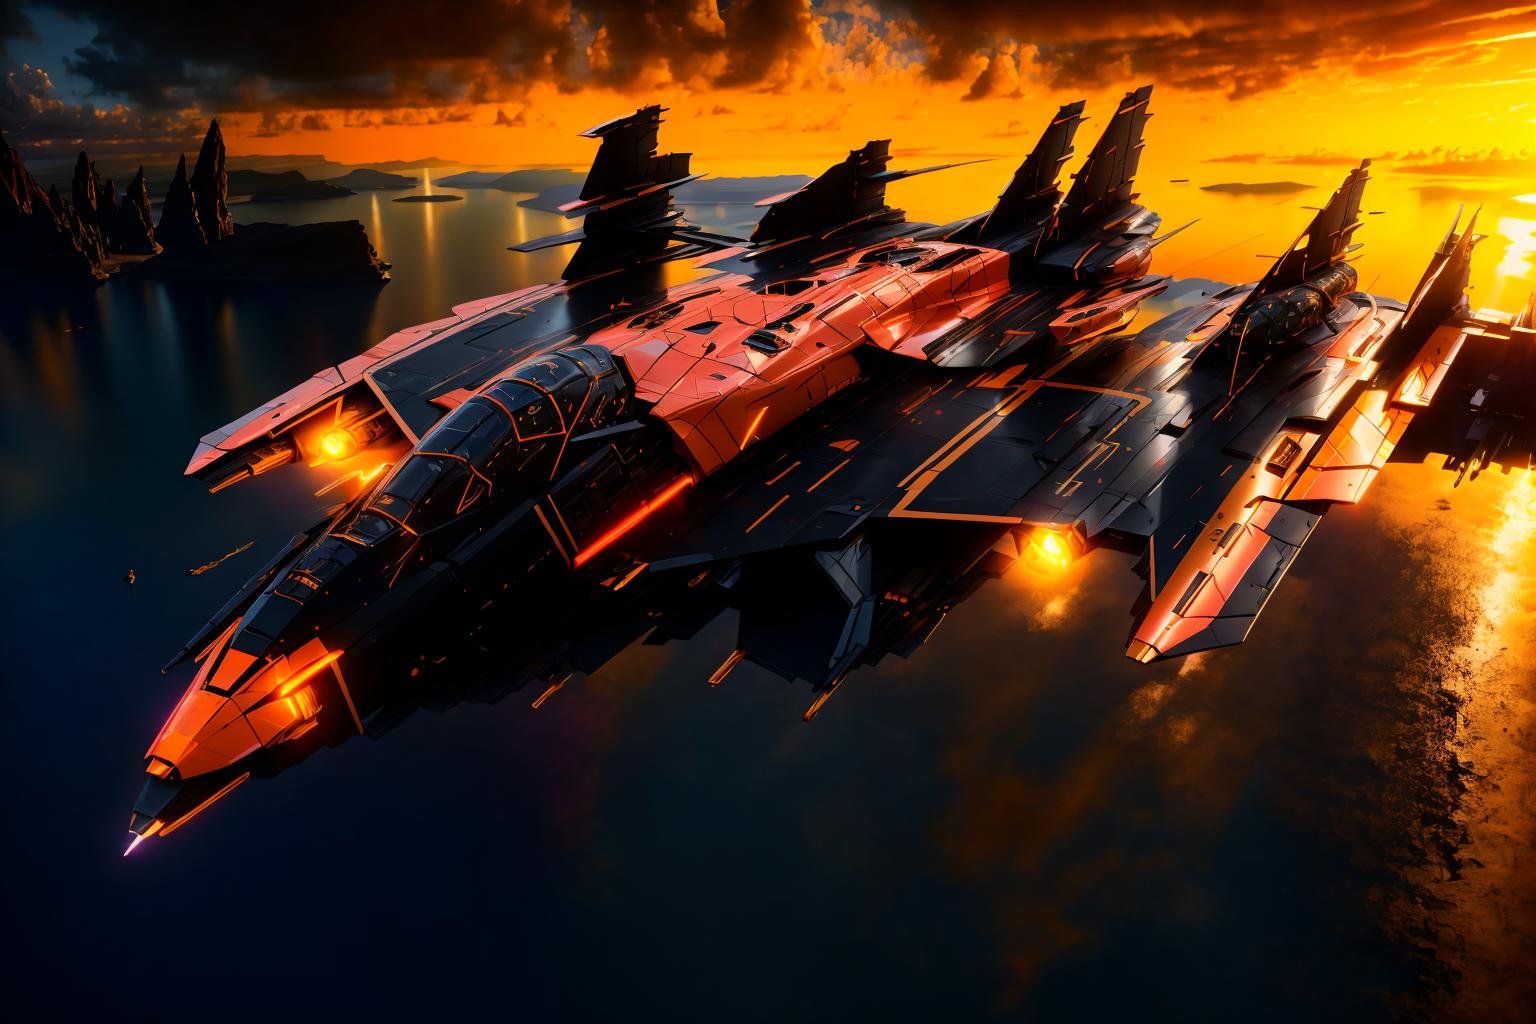 <lora:zxrspc_v3:1> Caramel zxrspc, masterpiece, best cinematic quality, photorealistic highly detailed 8k raw photo, volumetric lighting, volumetric shadows, reflective fuselage, A vibrant sunset in the clouds, with hues of orange, pink, and purple painting the sky